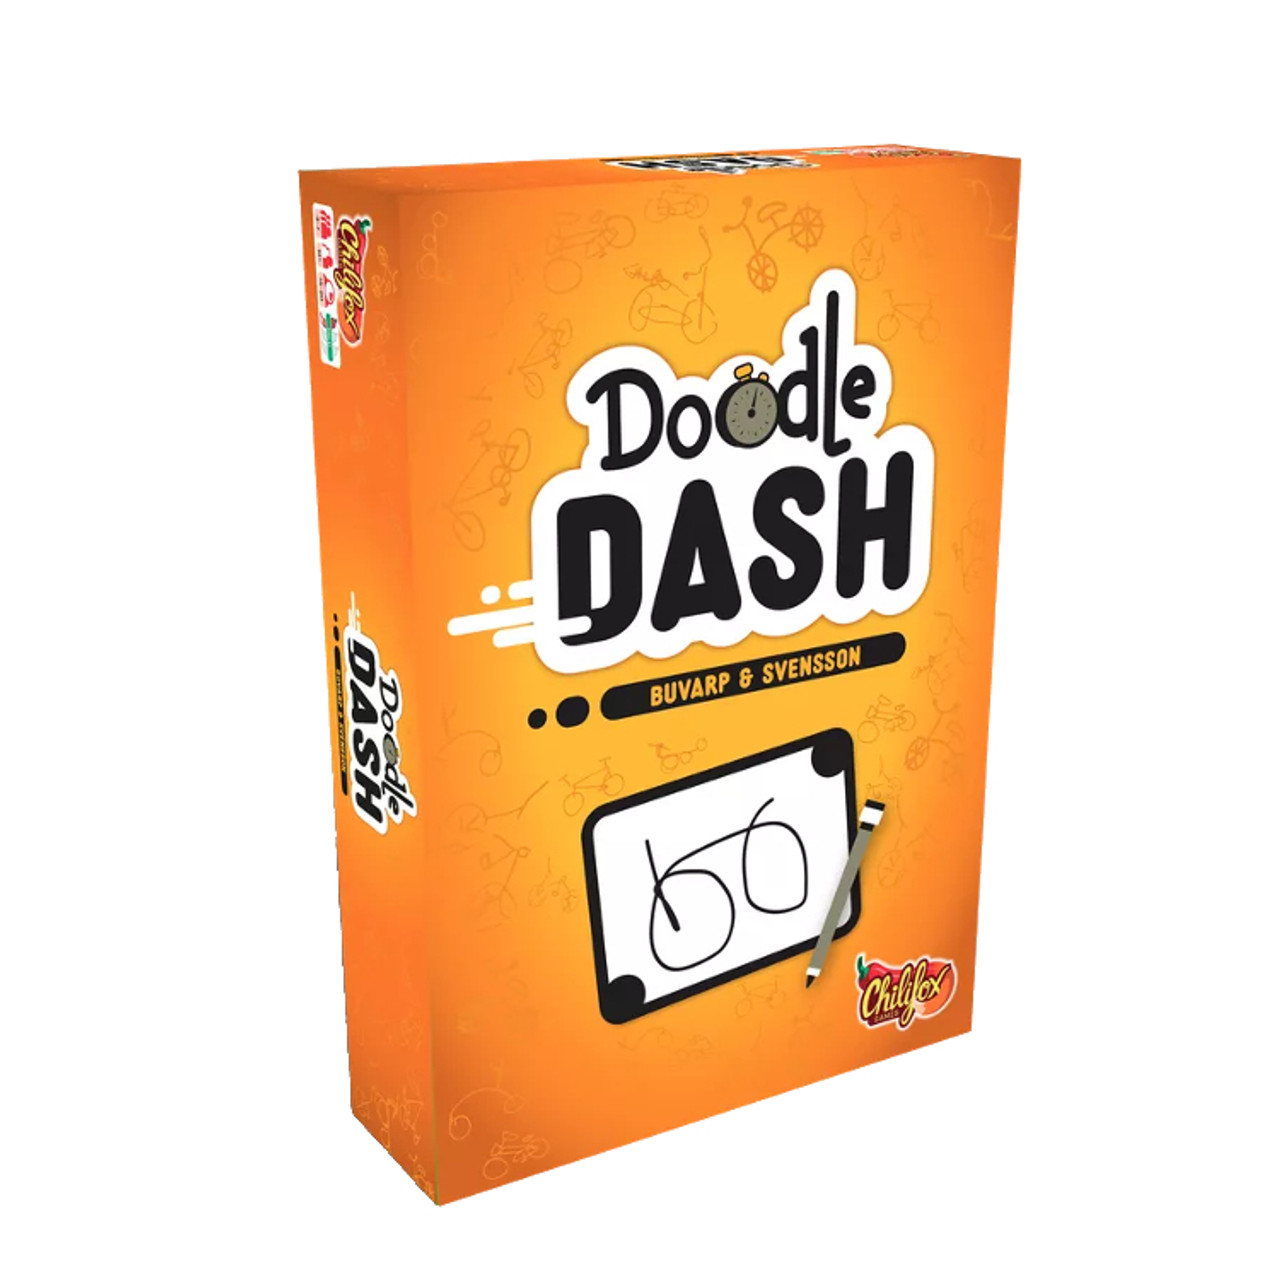 Boardgame Heaven How To Play & Review 149: Doodle Dash (Chilifox Games) 